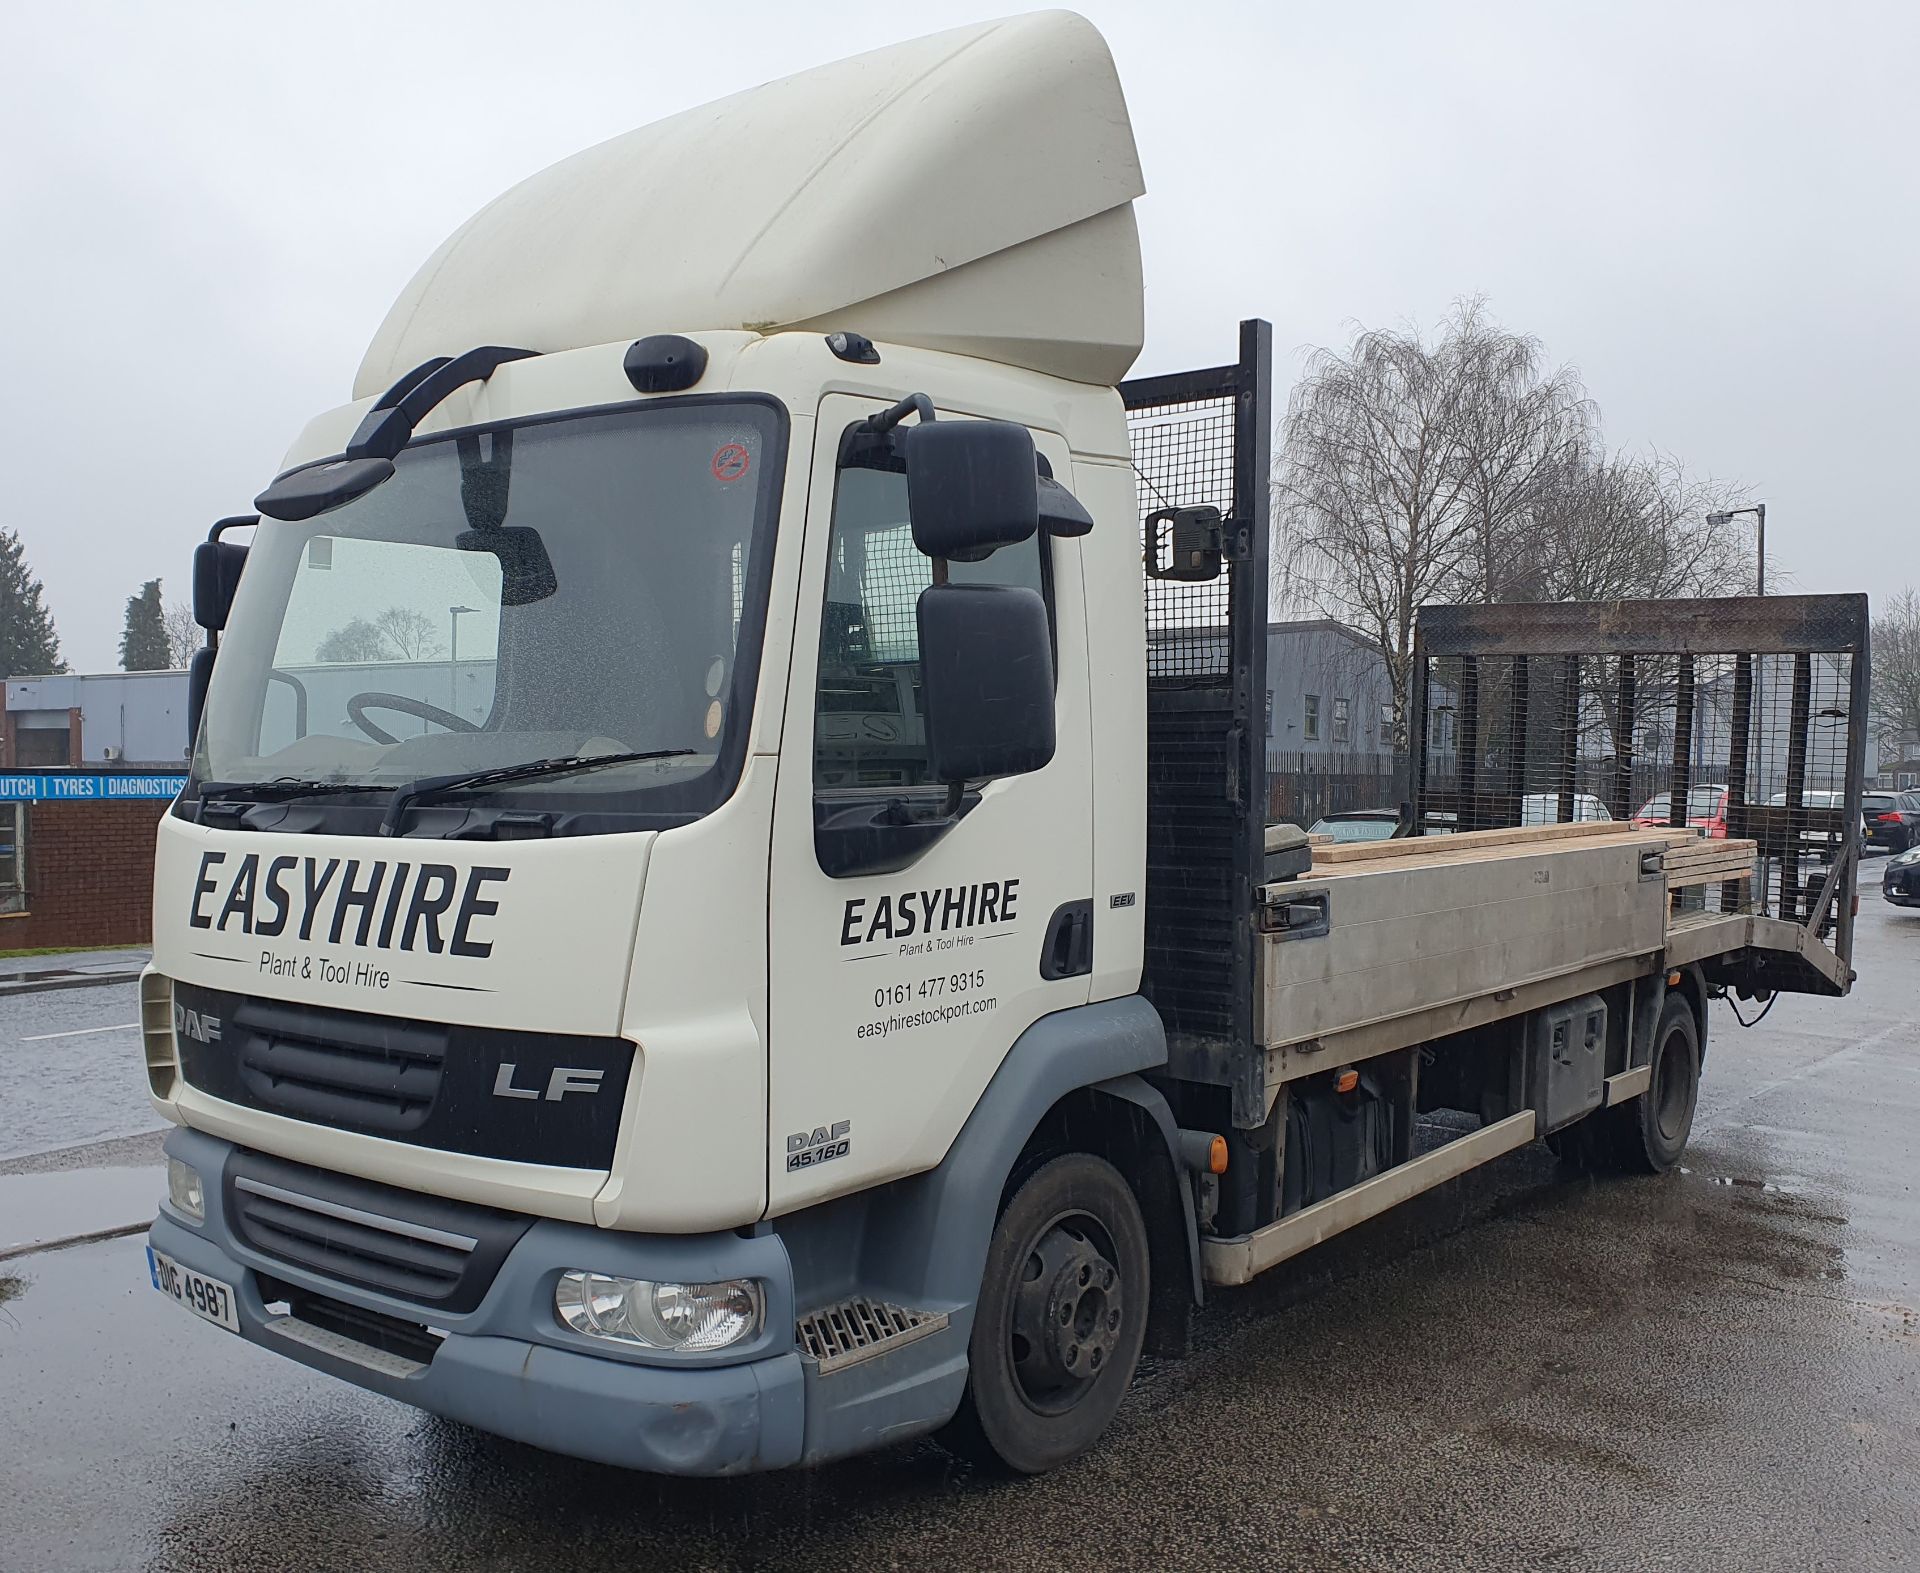 DAF LF 45.160 Flatbed Lorry w/ Loading Ramp & Electric Winch | DIG 4987 | 494,328km - Image 3 of 22